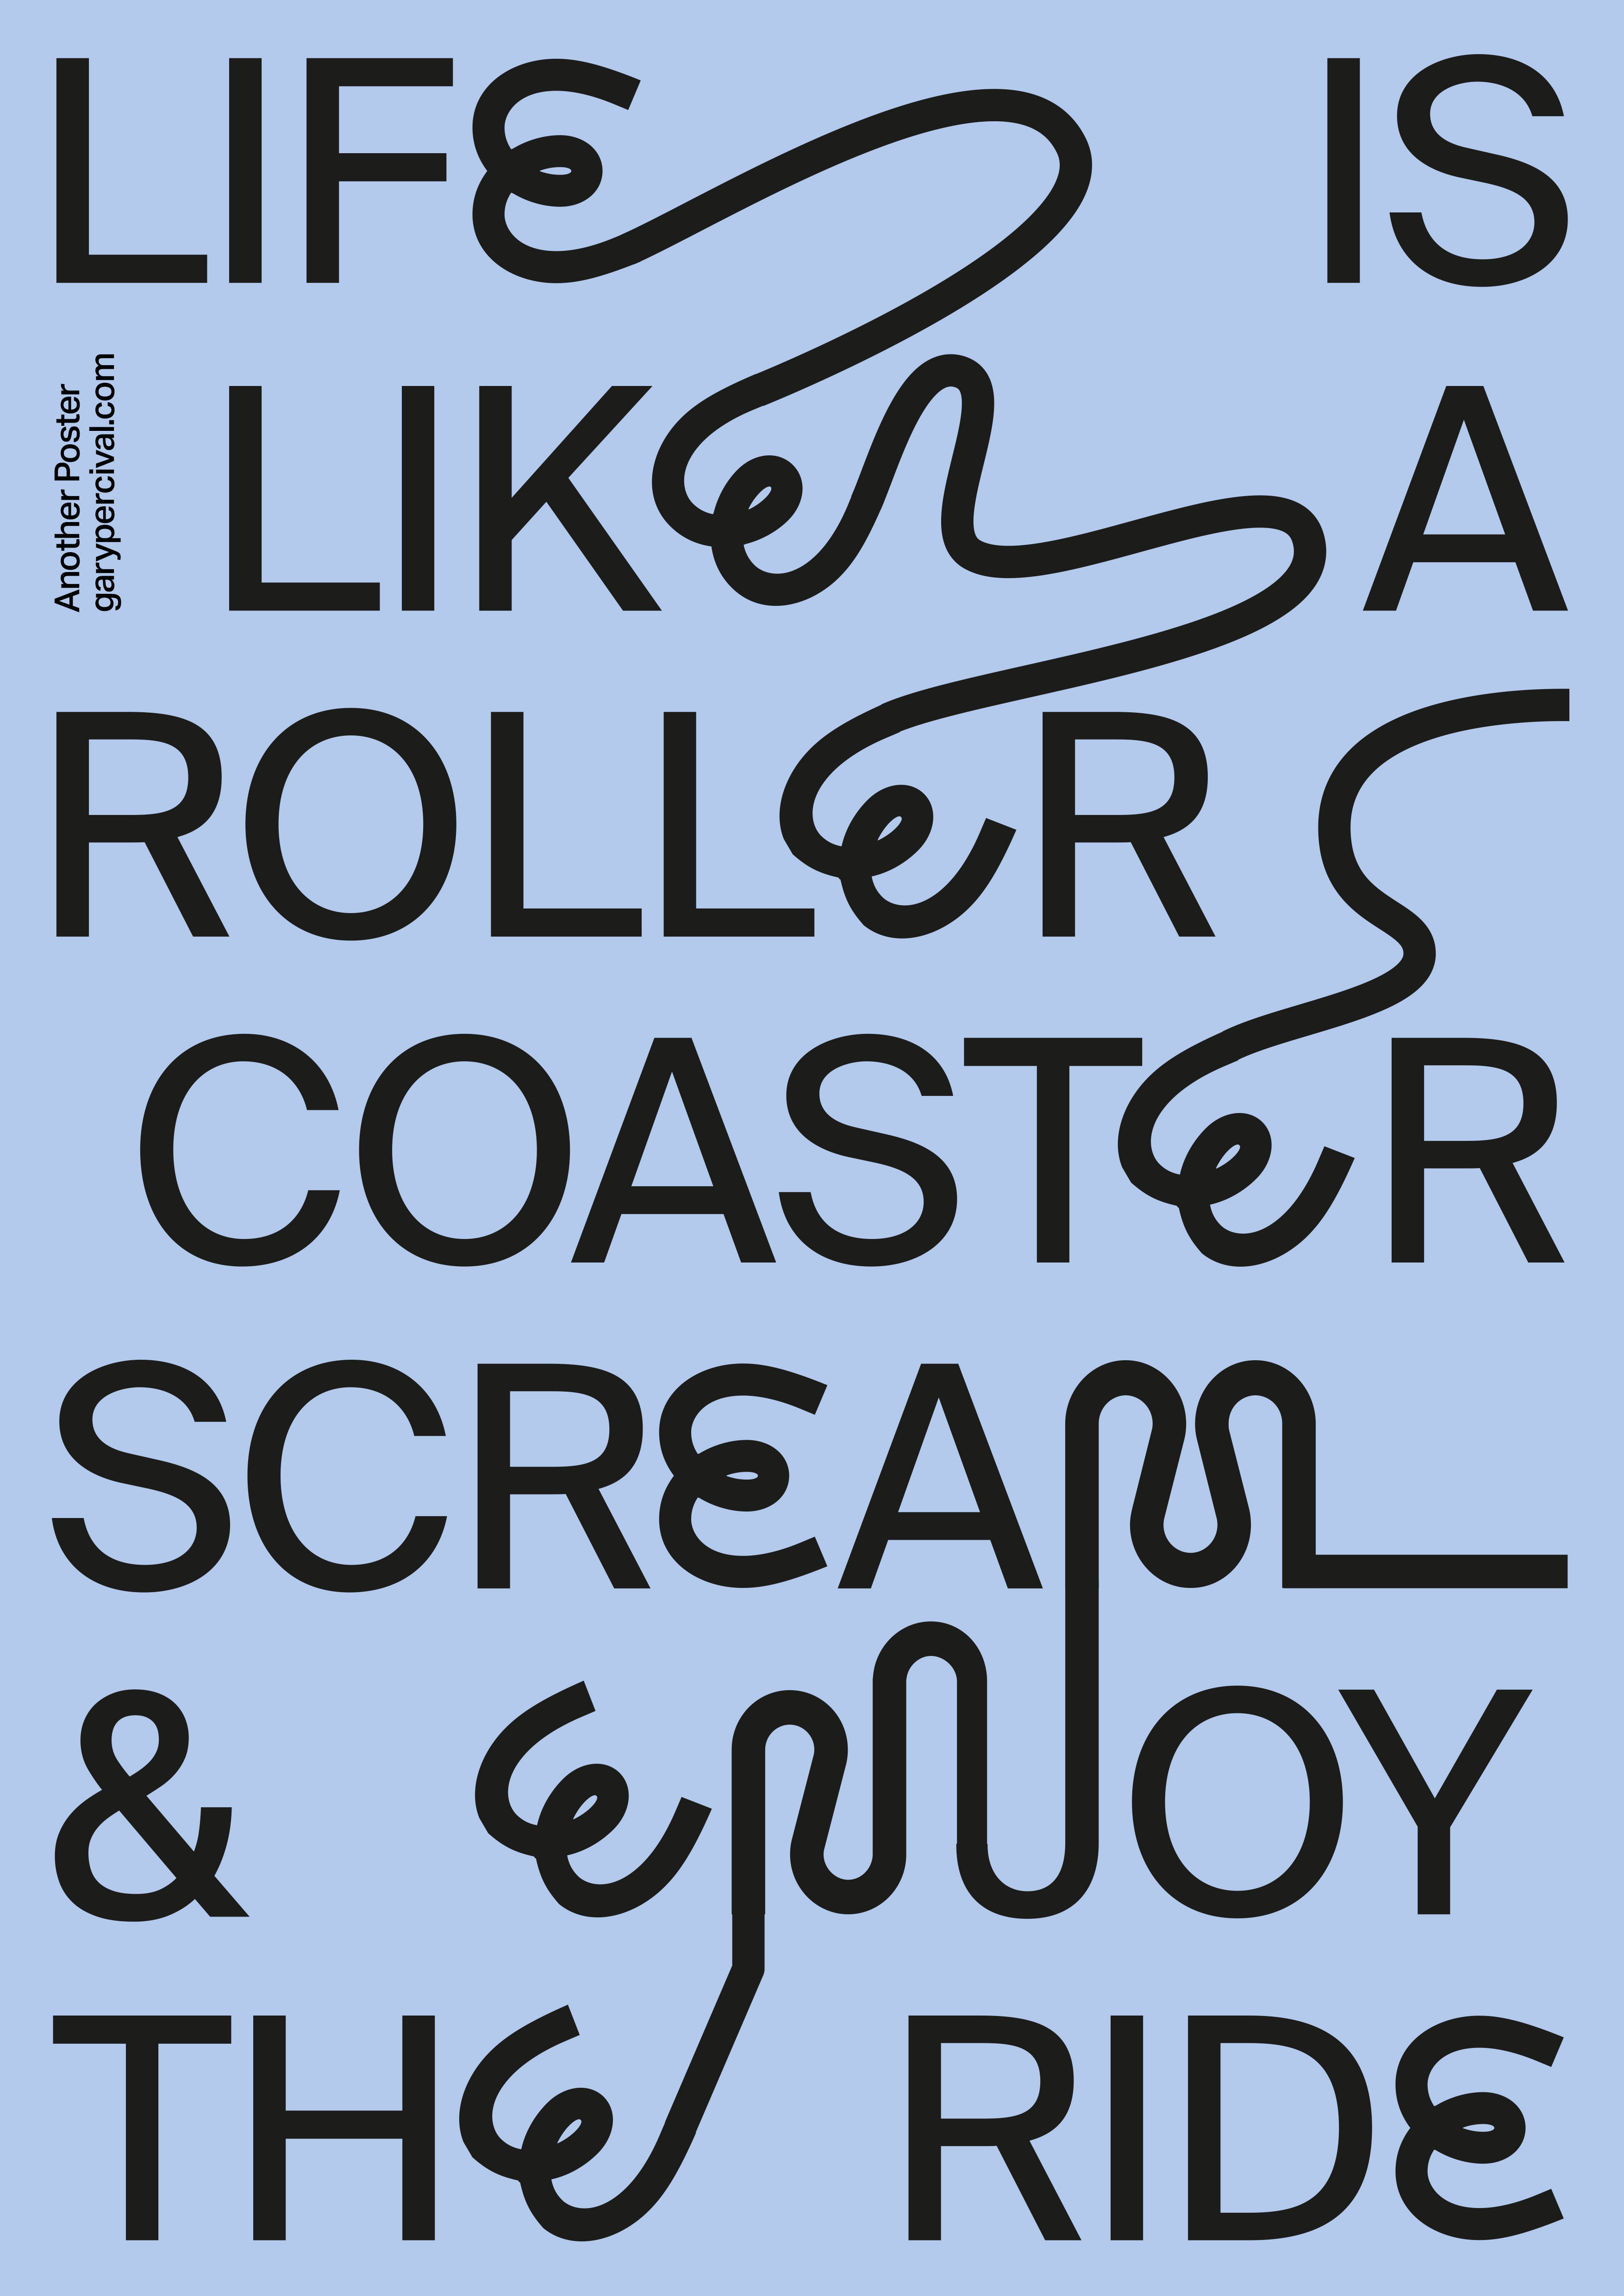 Life is like a roller coaster, scream 7 enjoy the ride.